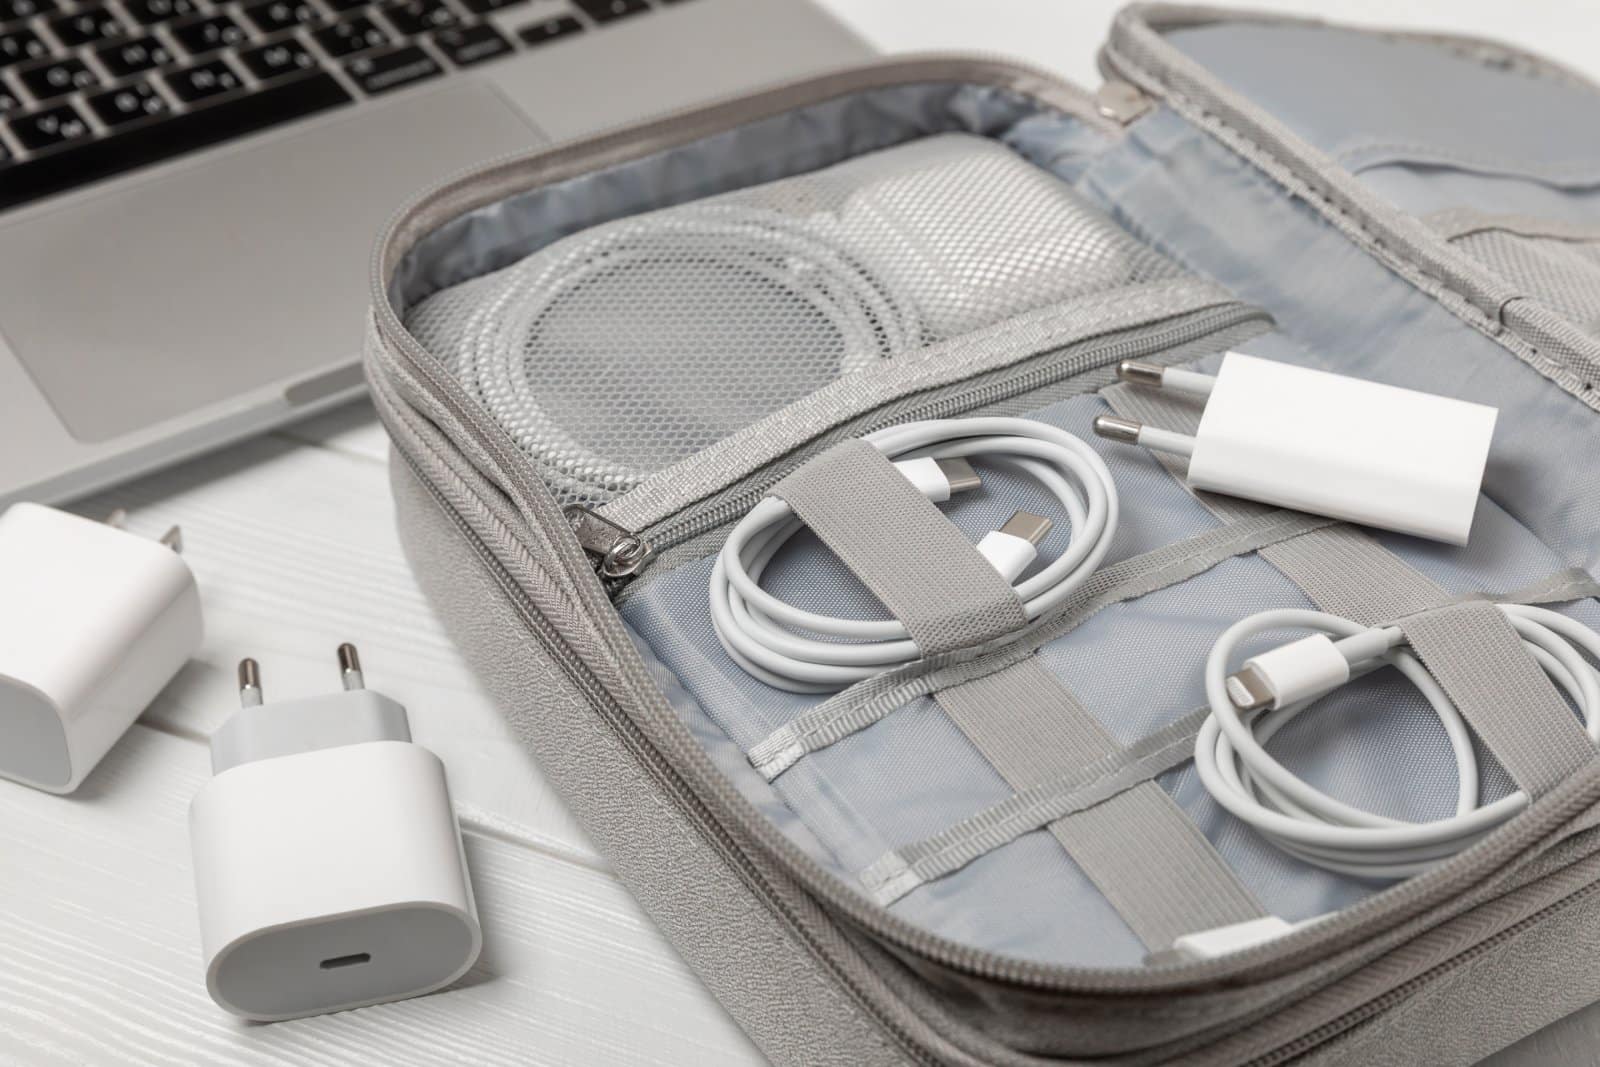 <p class="wp-caption-text">Image Credit: Shutterstock / Avocado_studio</p>  <p>Use sealable snack bags to organize small items like cables, adapters, and other electronics to keep them from tangling or getting lost.</p>